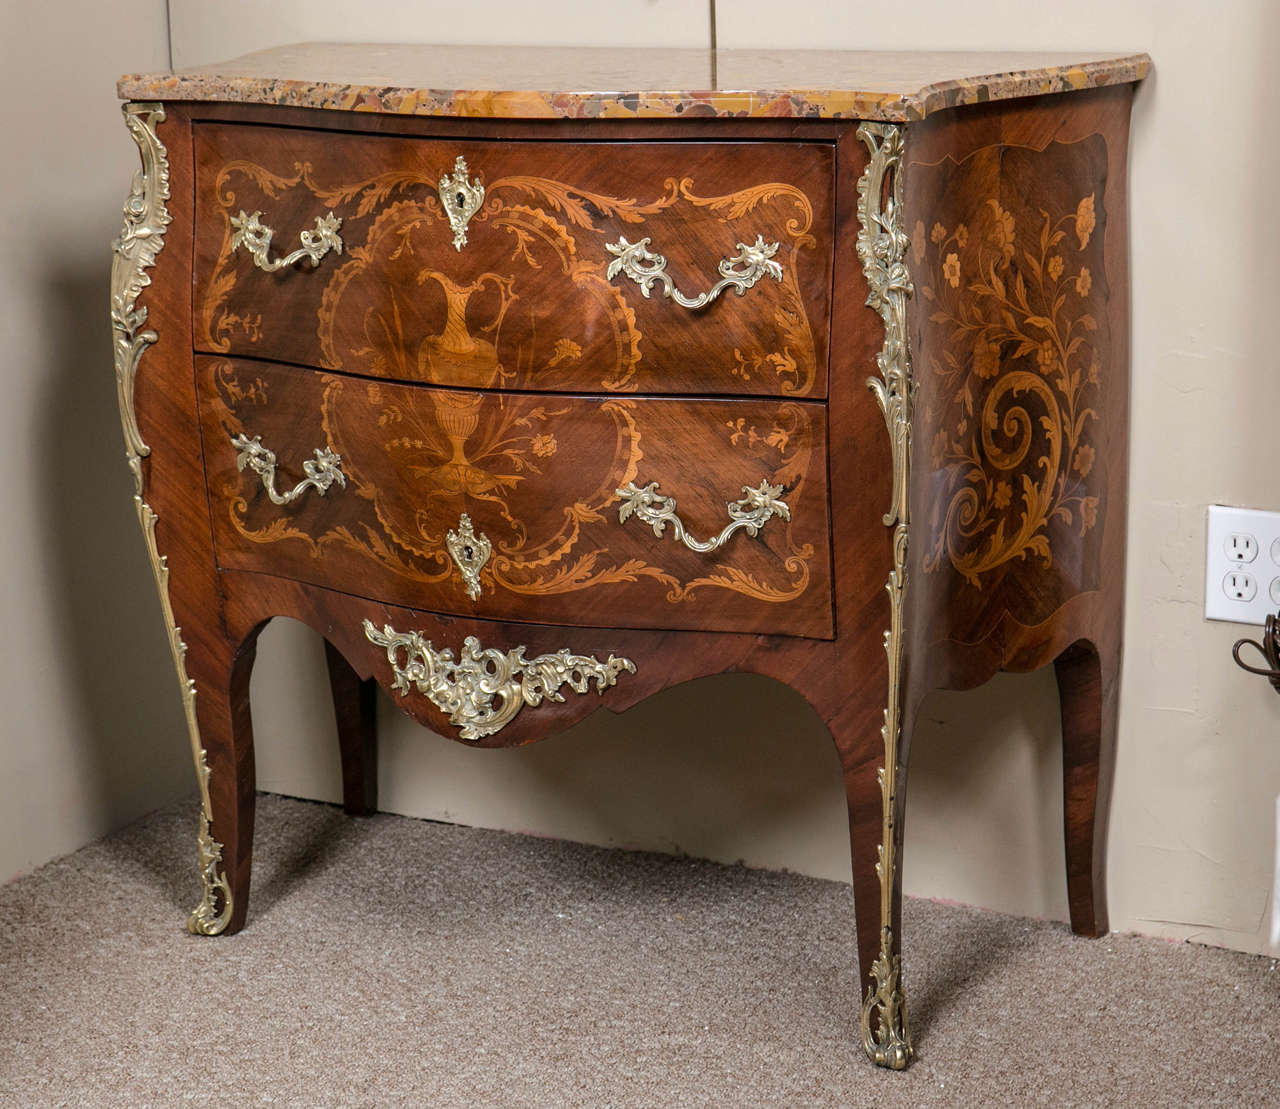 Pair of French Louis XV Style kingwood commodes, circa 1920s, the serpentine shaped marble above a conforming bombe case fitted with two drawers, decorated with elaborate vessel pattern inlays, raised on ormolu mounted splayed legs ending in sabots.